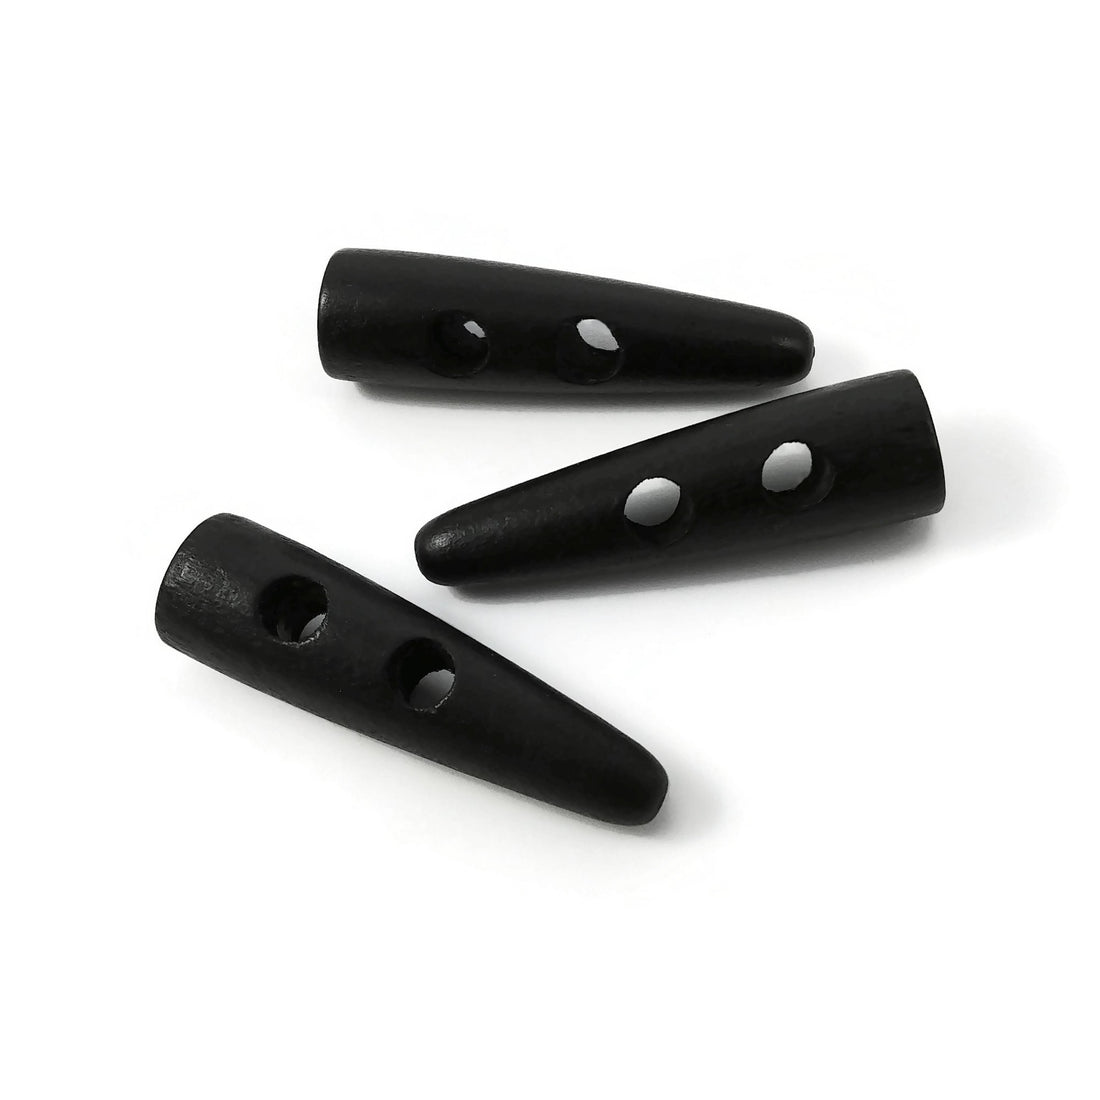 Toggle buttons - 3 big wooden toggle buttons - Black 2 inches